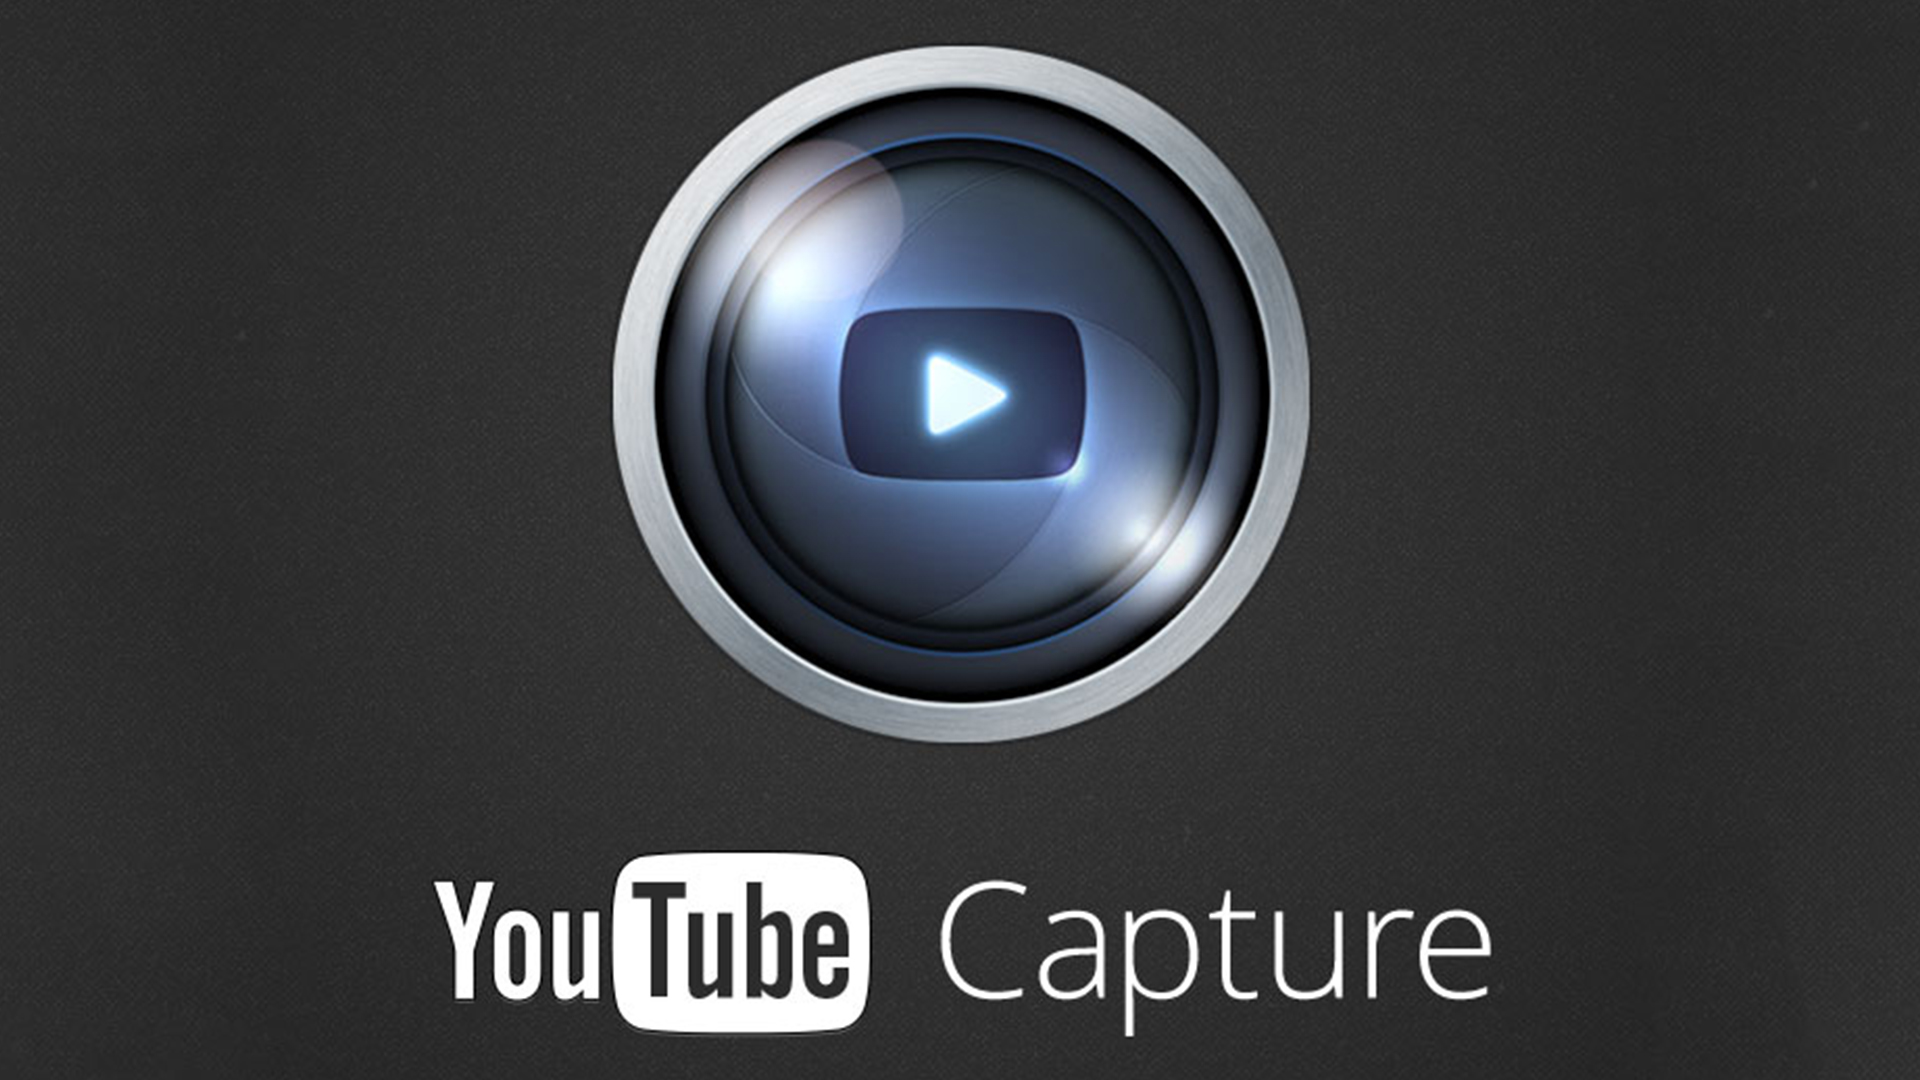 YouTube Capture Hands On Review